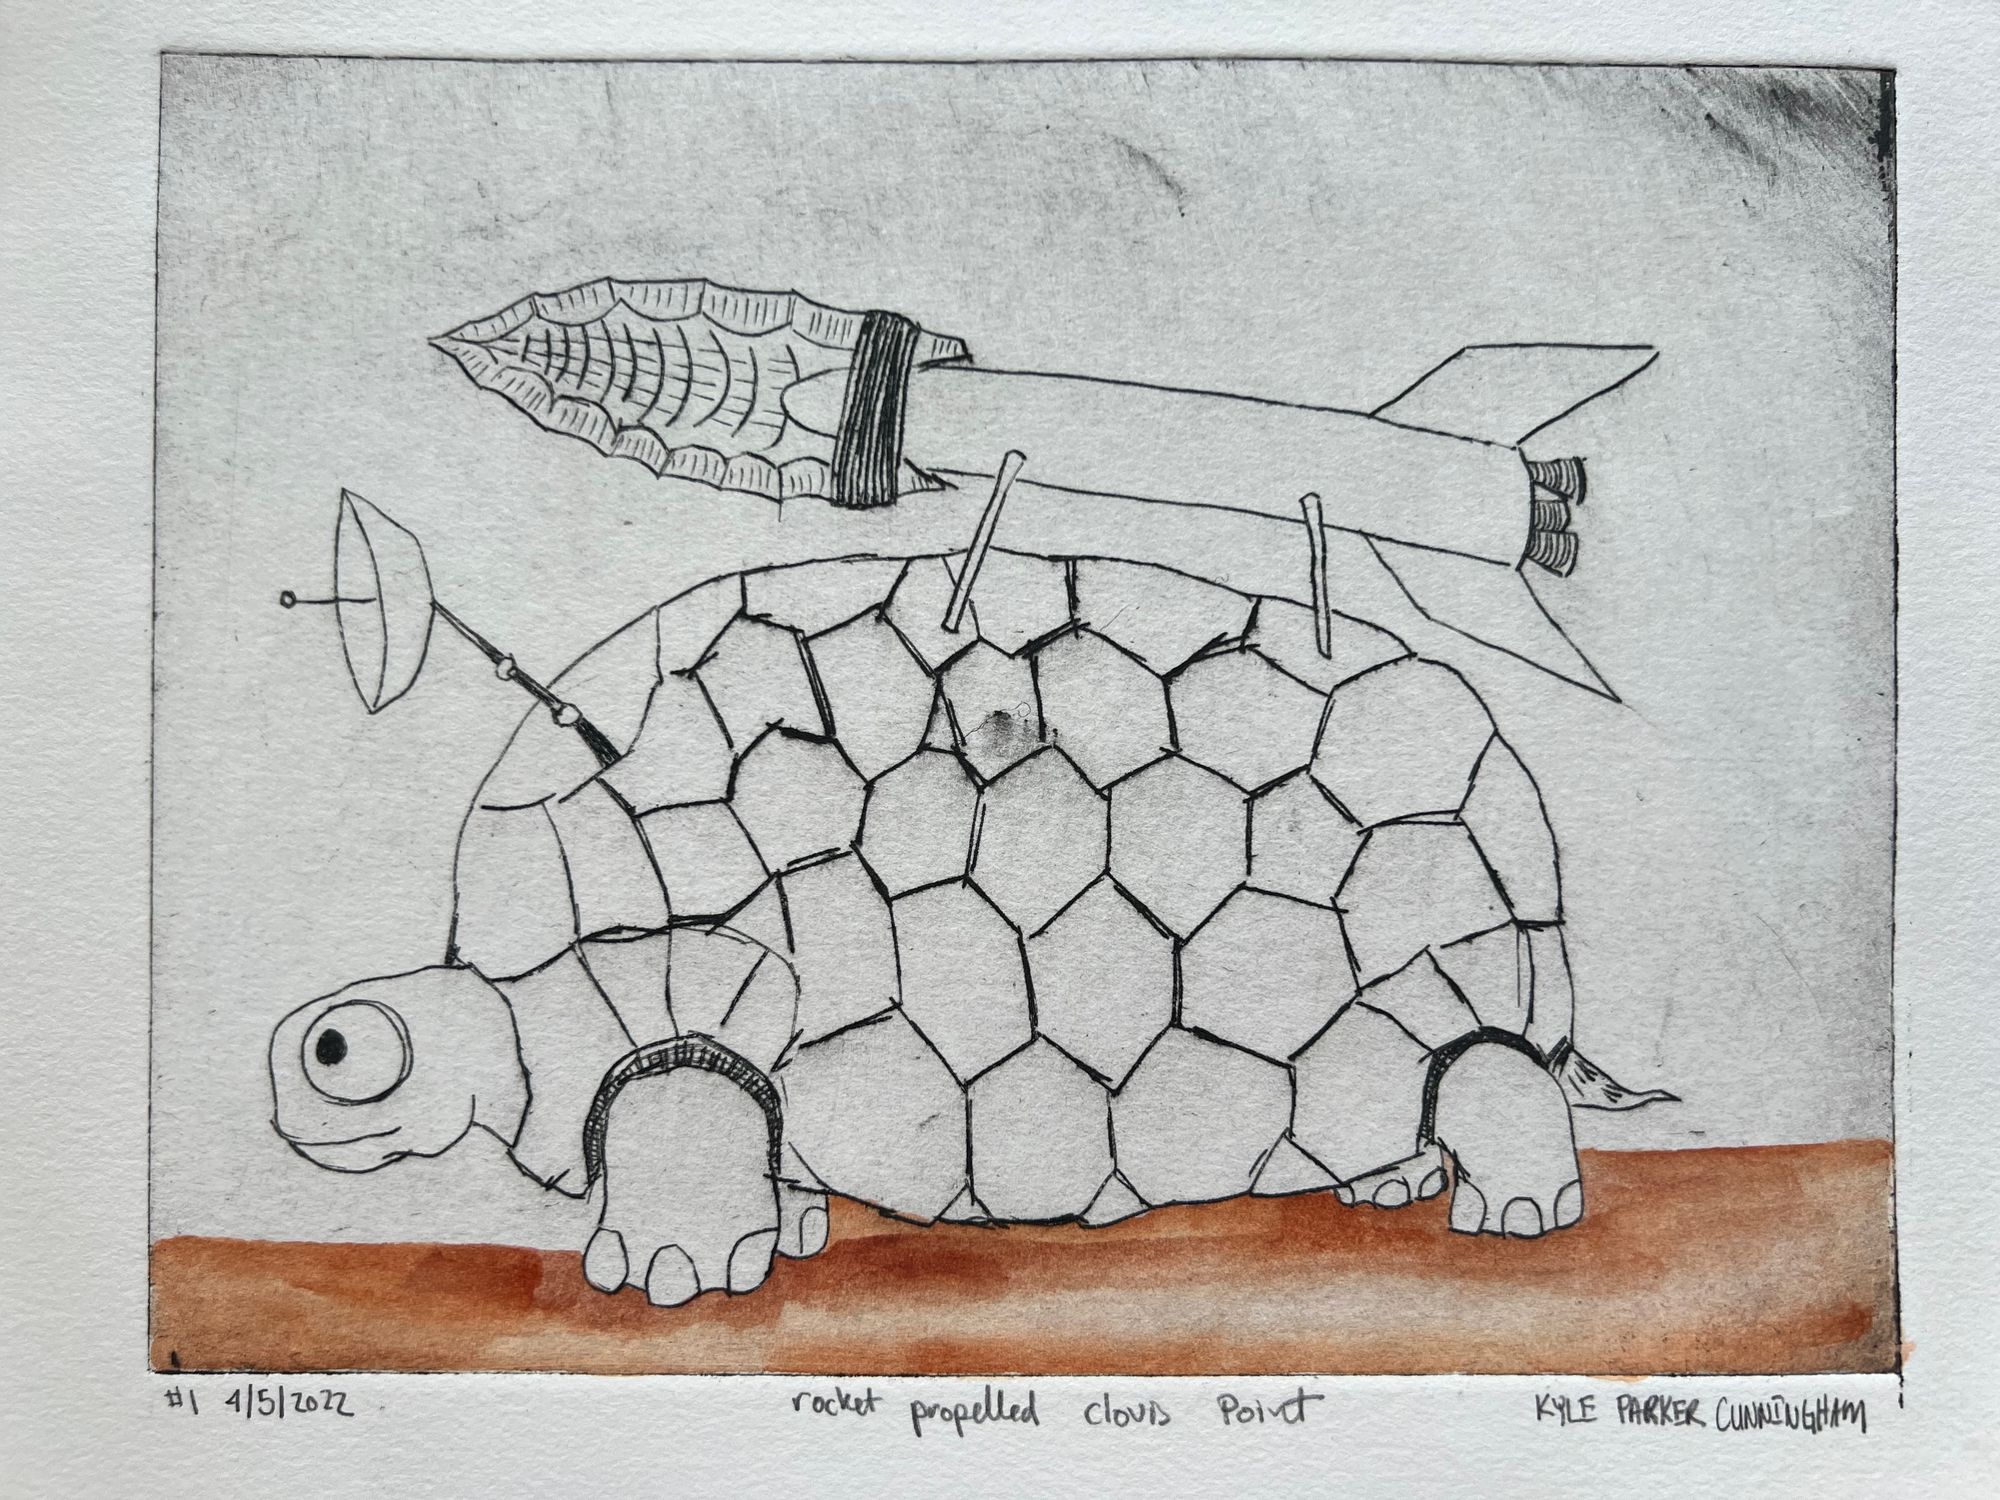 A turtle with rocket and radar affixed to his shell patrols his domain. The Rocket includes a cloves point knapped warhead.